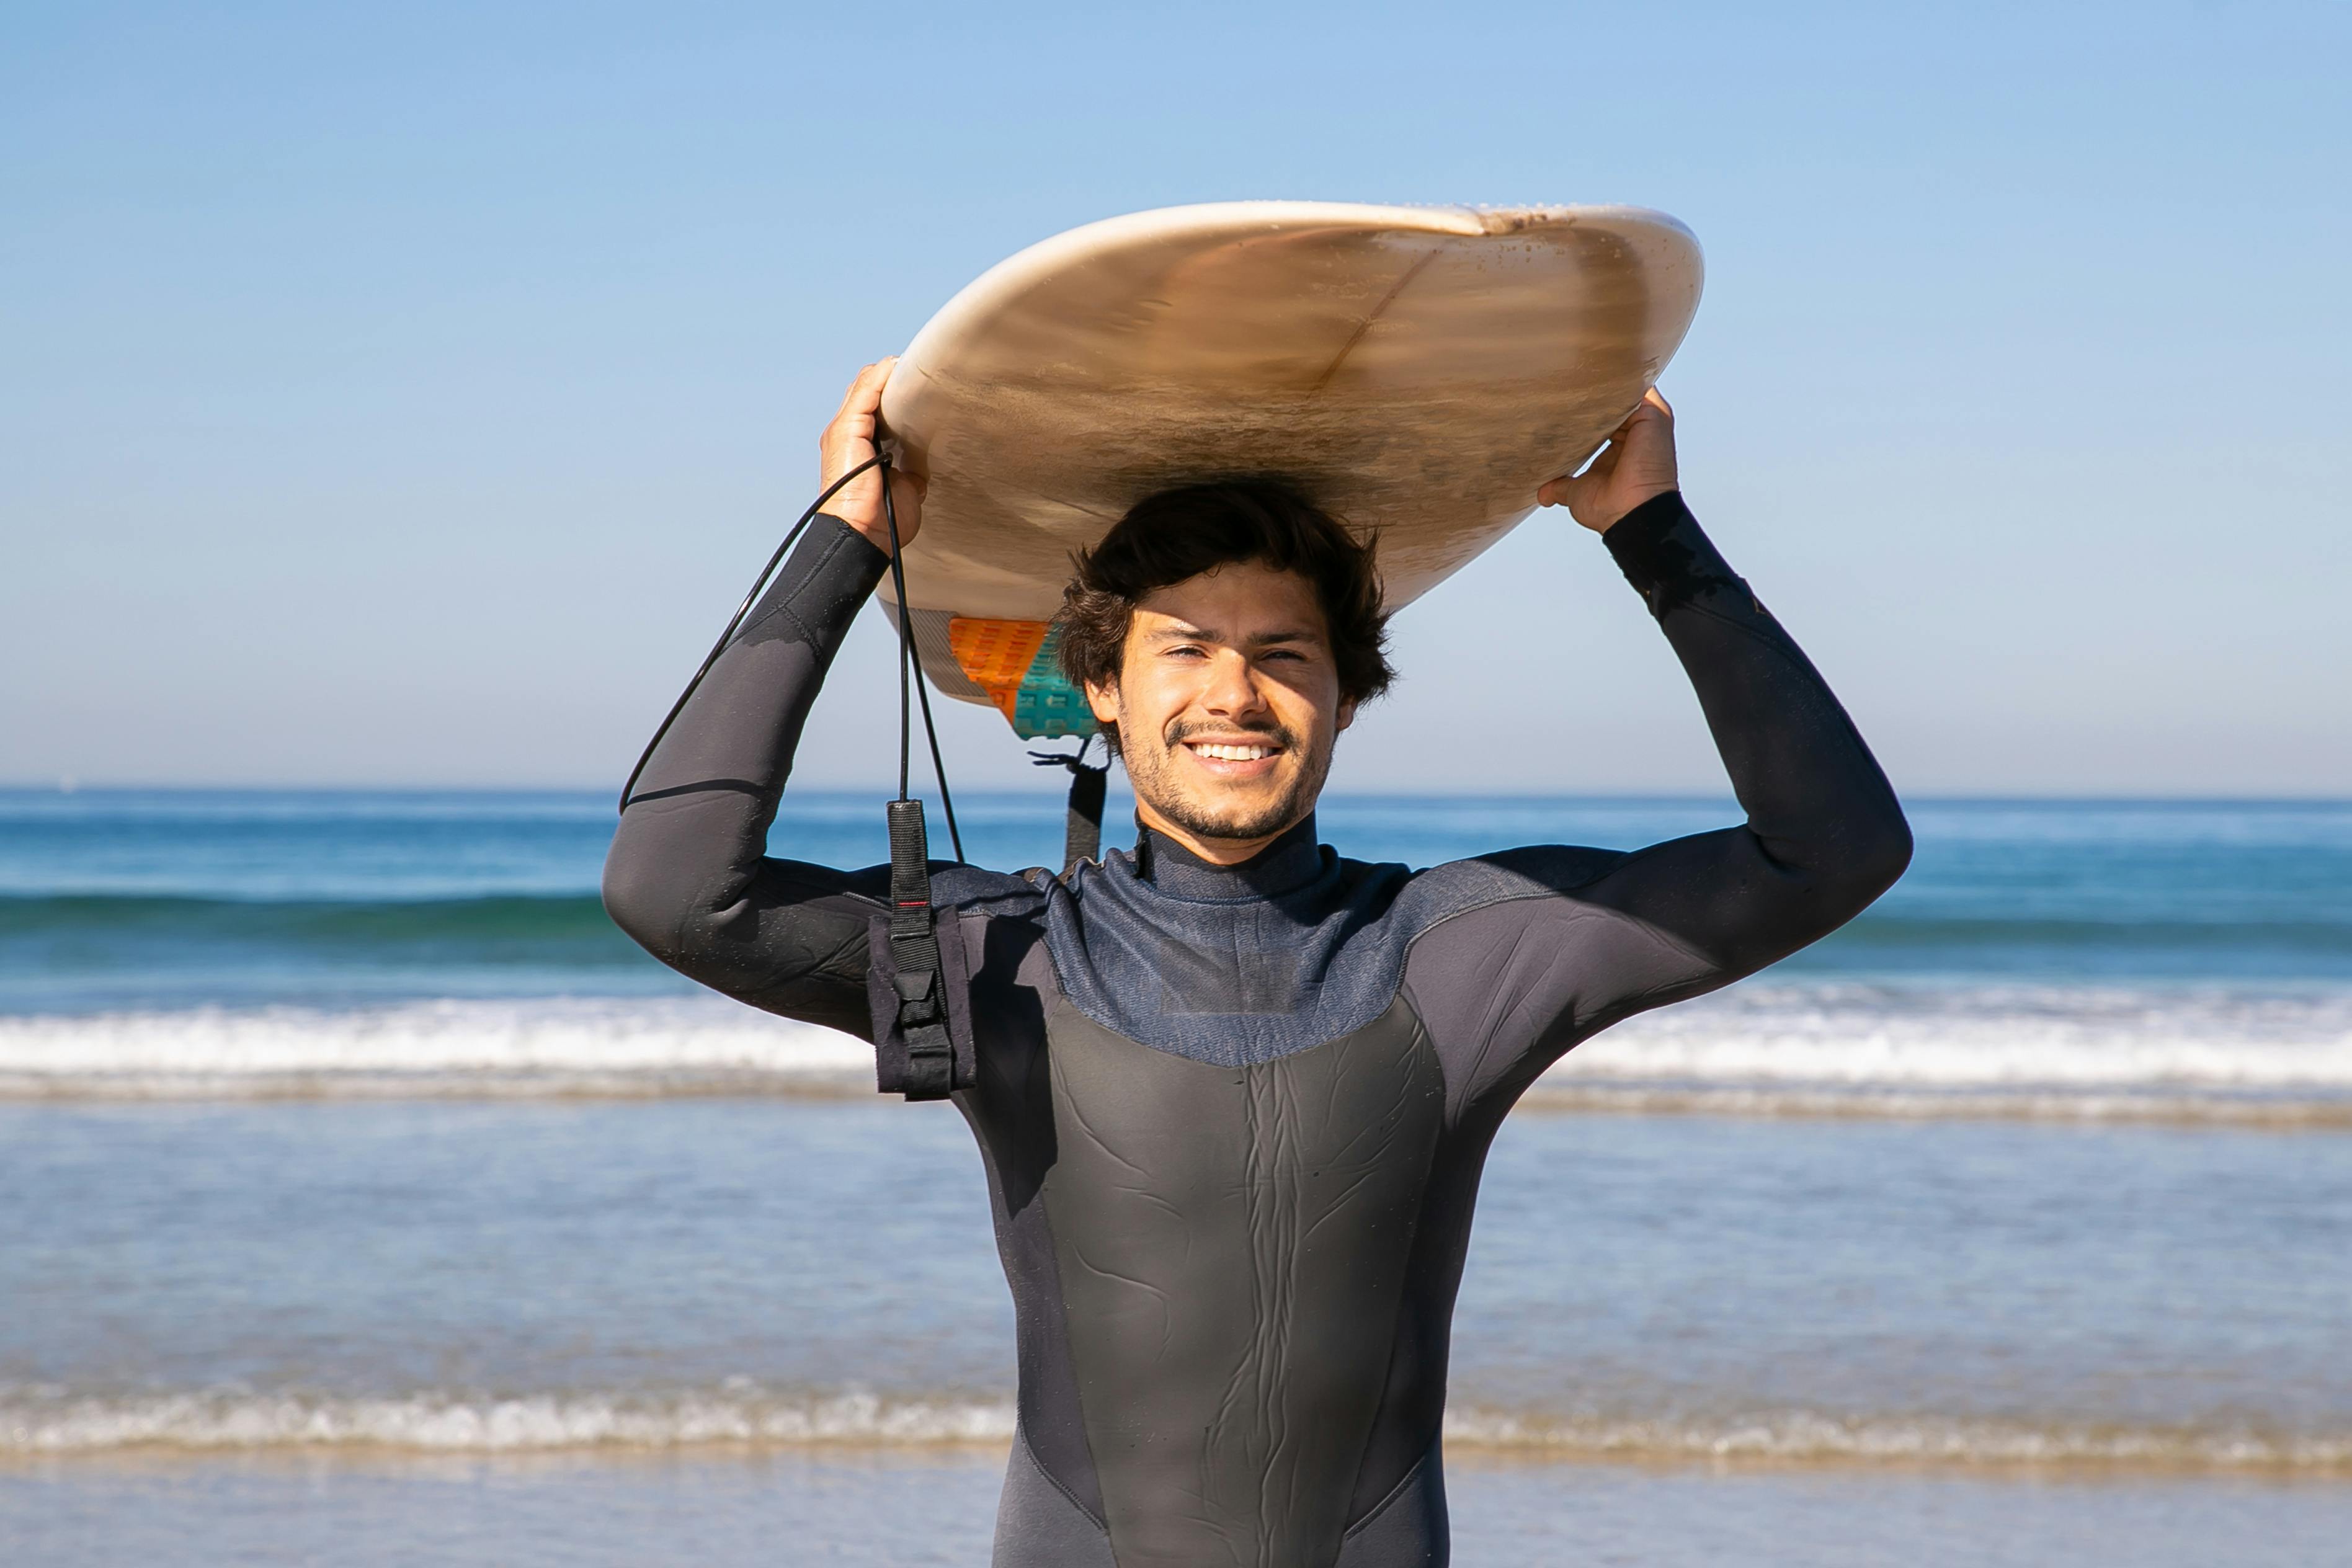 Wetsuit Beach Photos, Download The BEST Free Wetsuit Beach Stock Photos ...